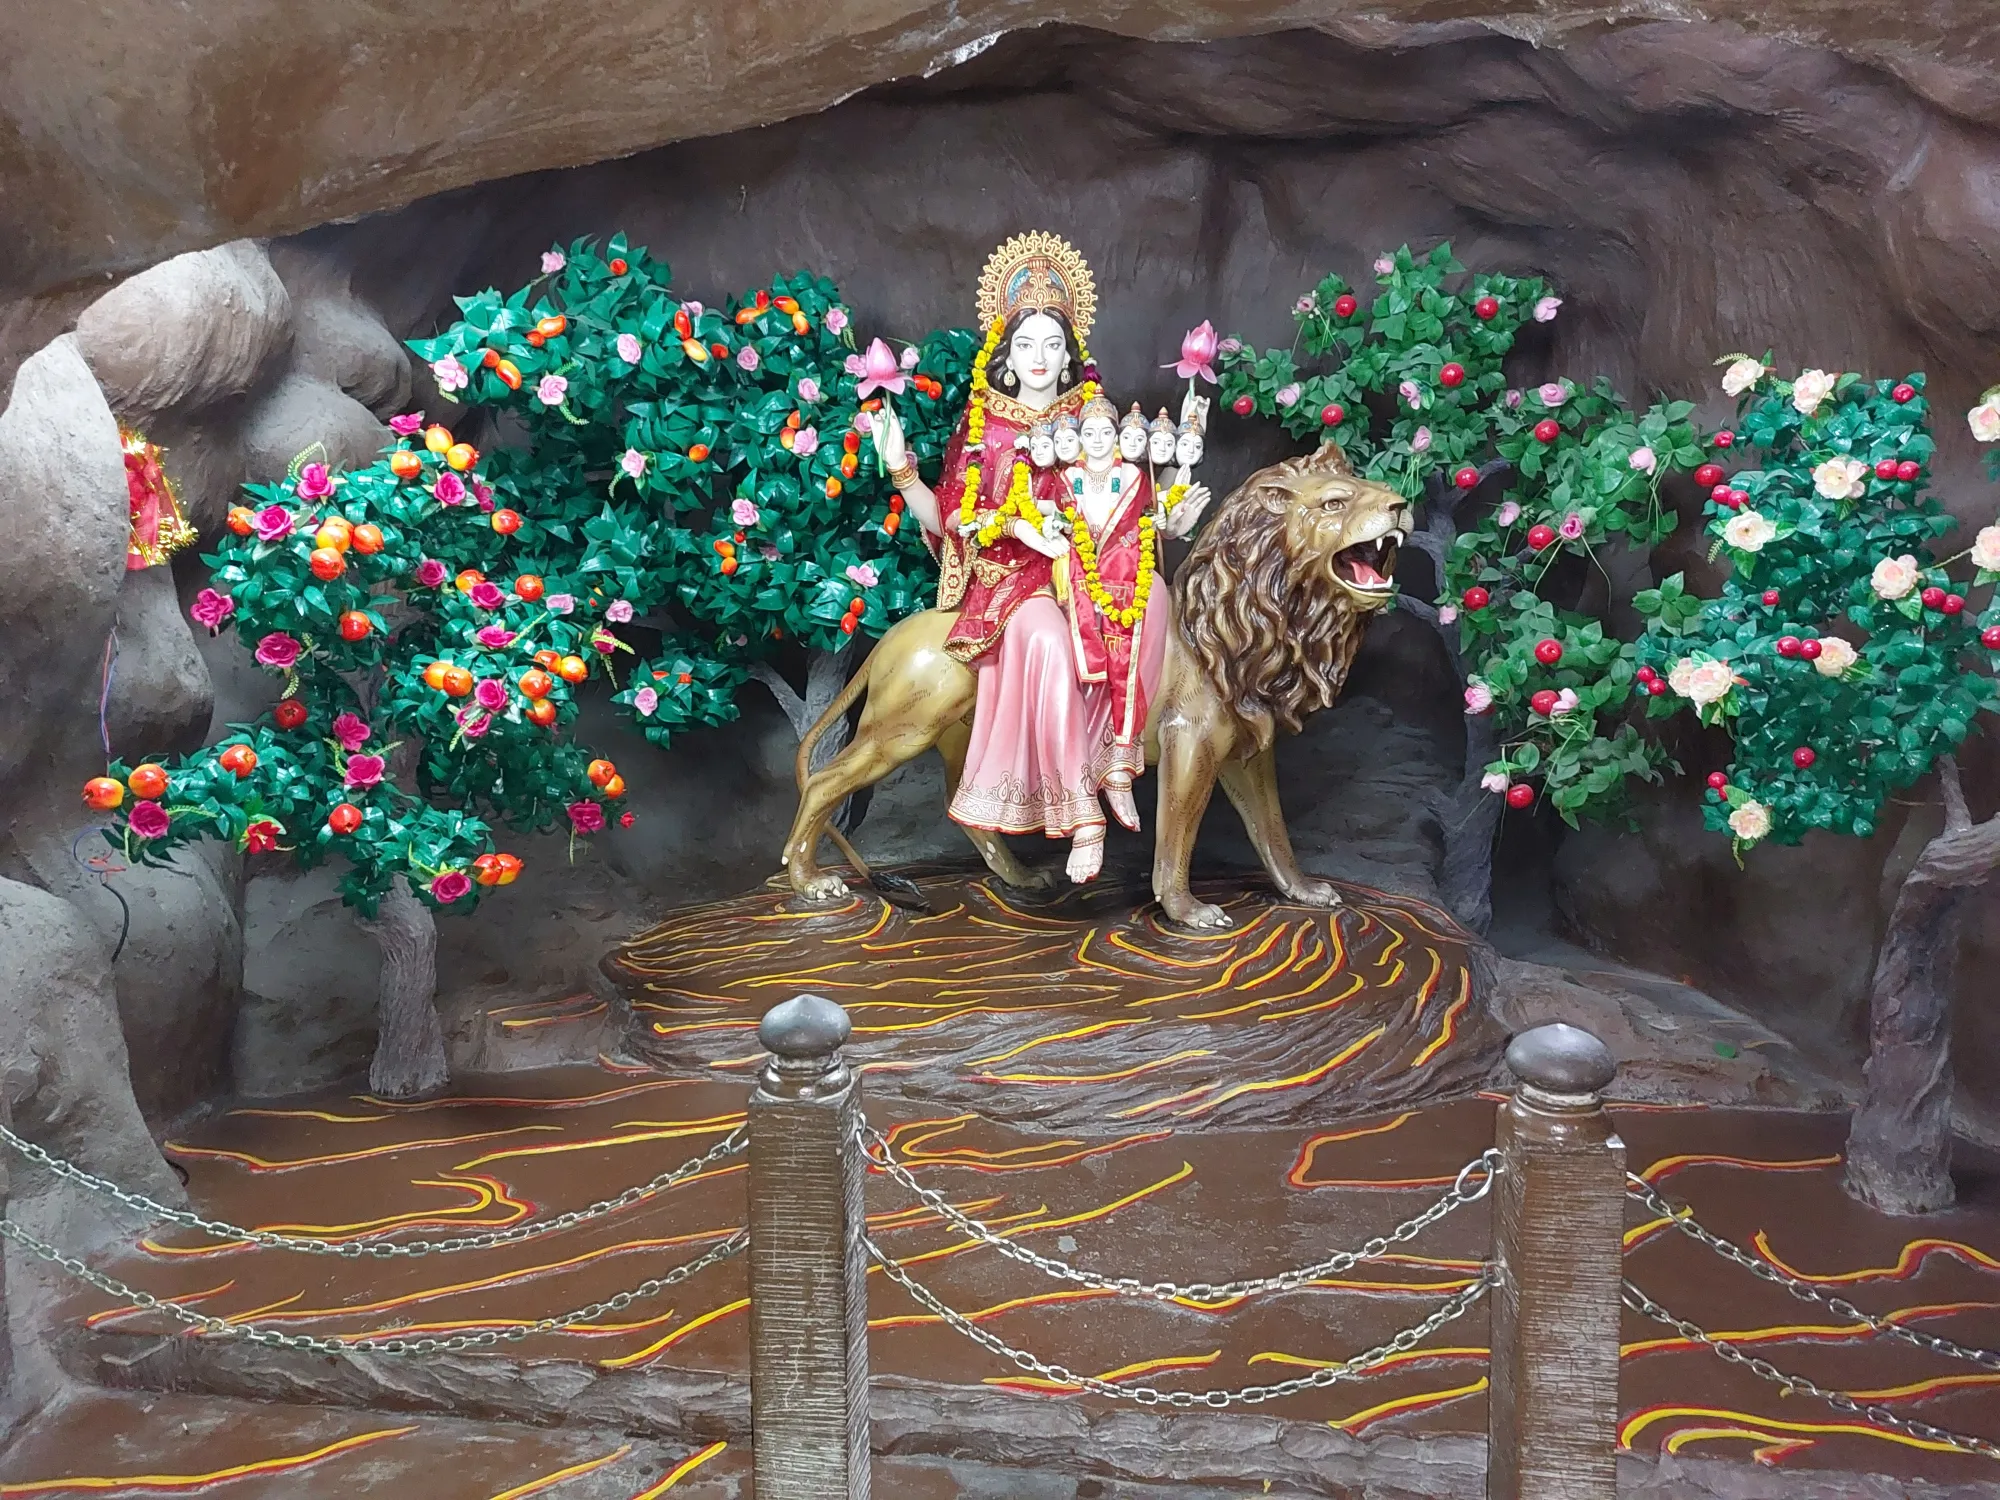 Goddess Skandamata is the fifth form of Goddess Durga and is worshipped on the fifth day of Navratri, known as Panchami